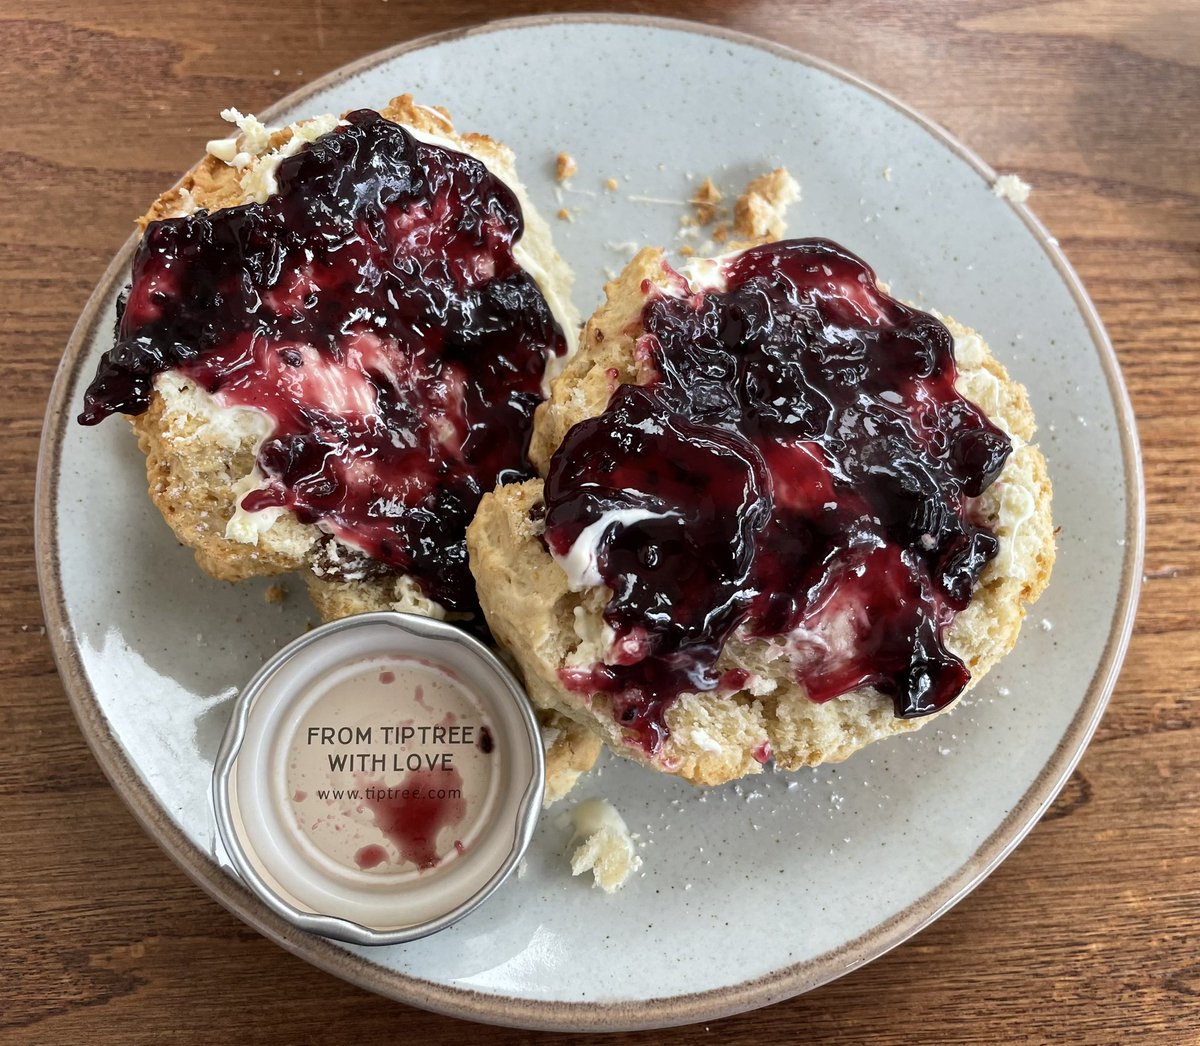 Afternoon tea on my way home  @FakenhamGC cracking scone - so fresh & clearly home made 😋 I’ve gone rouge with blackcurrant jam with love ❤️ from @tiptree & @Roddas_Cream #CreamFirst @Cream_first @CreamTeaSociety #HappyDays #Downtime